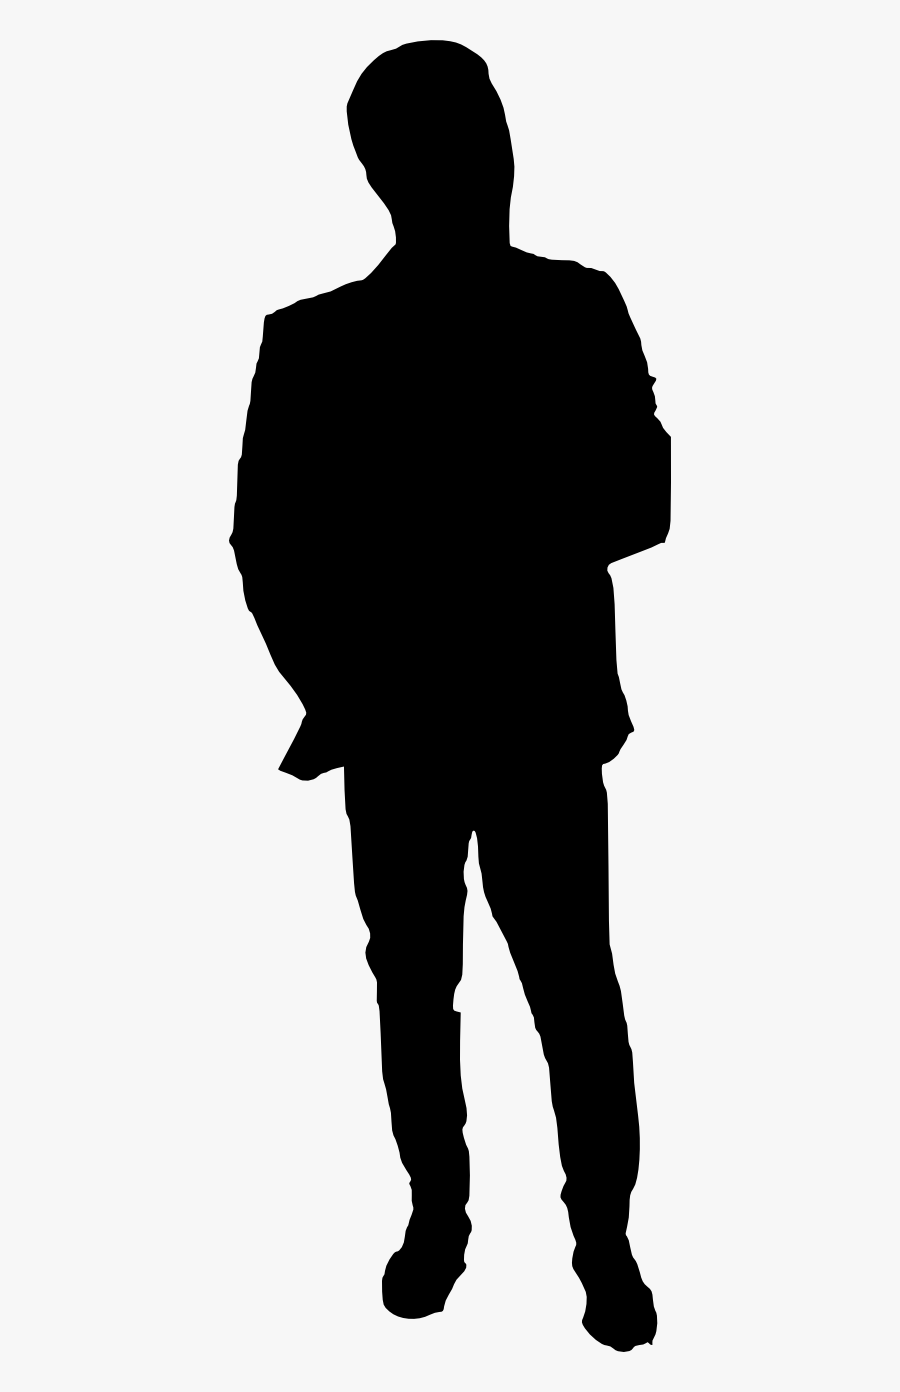 20 Man Silhouette - Transparent Background Human Silhouette Png , Free